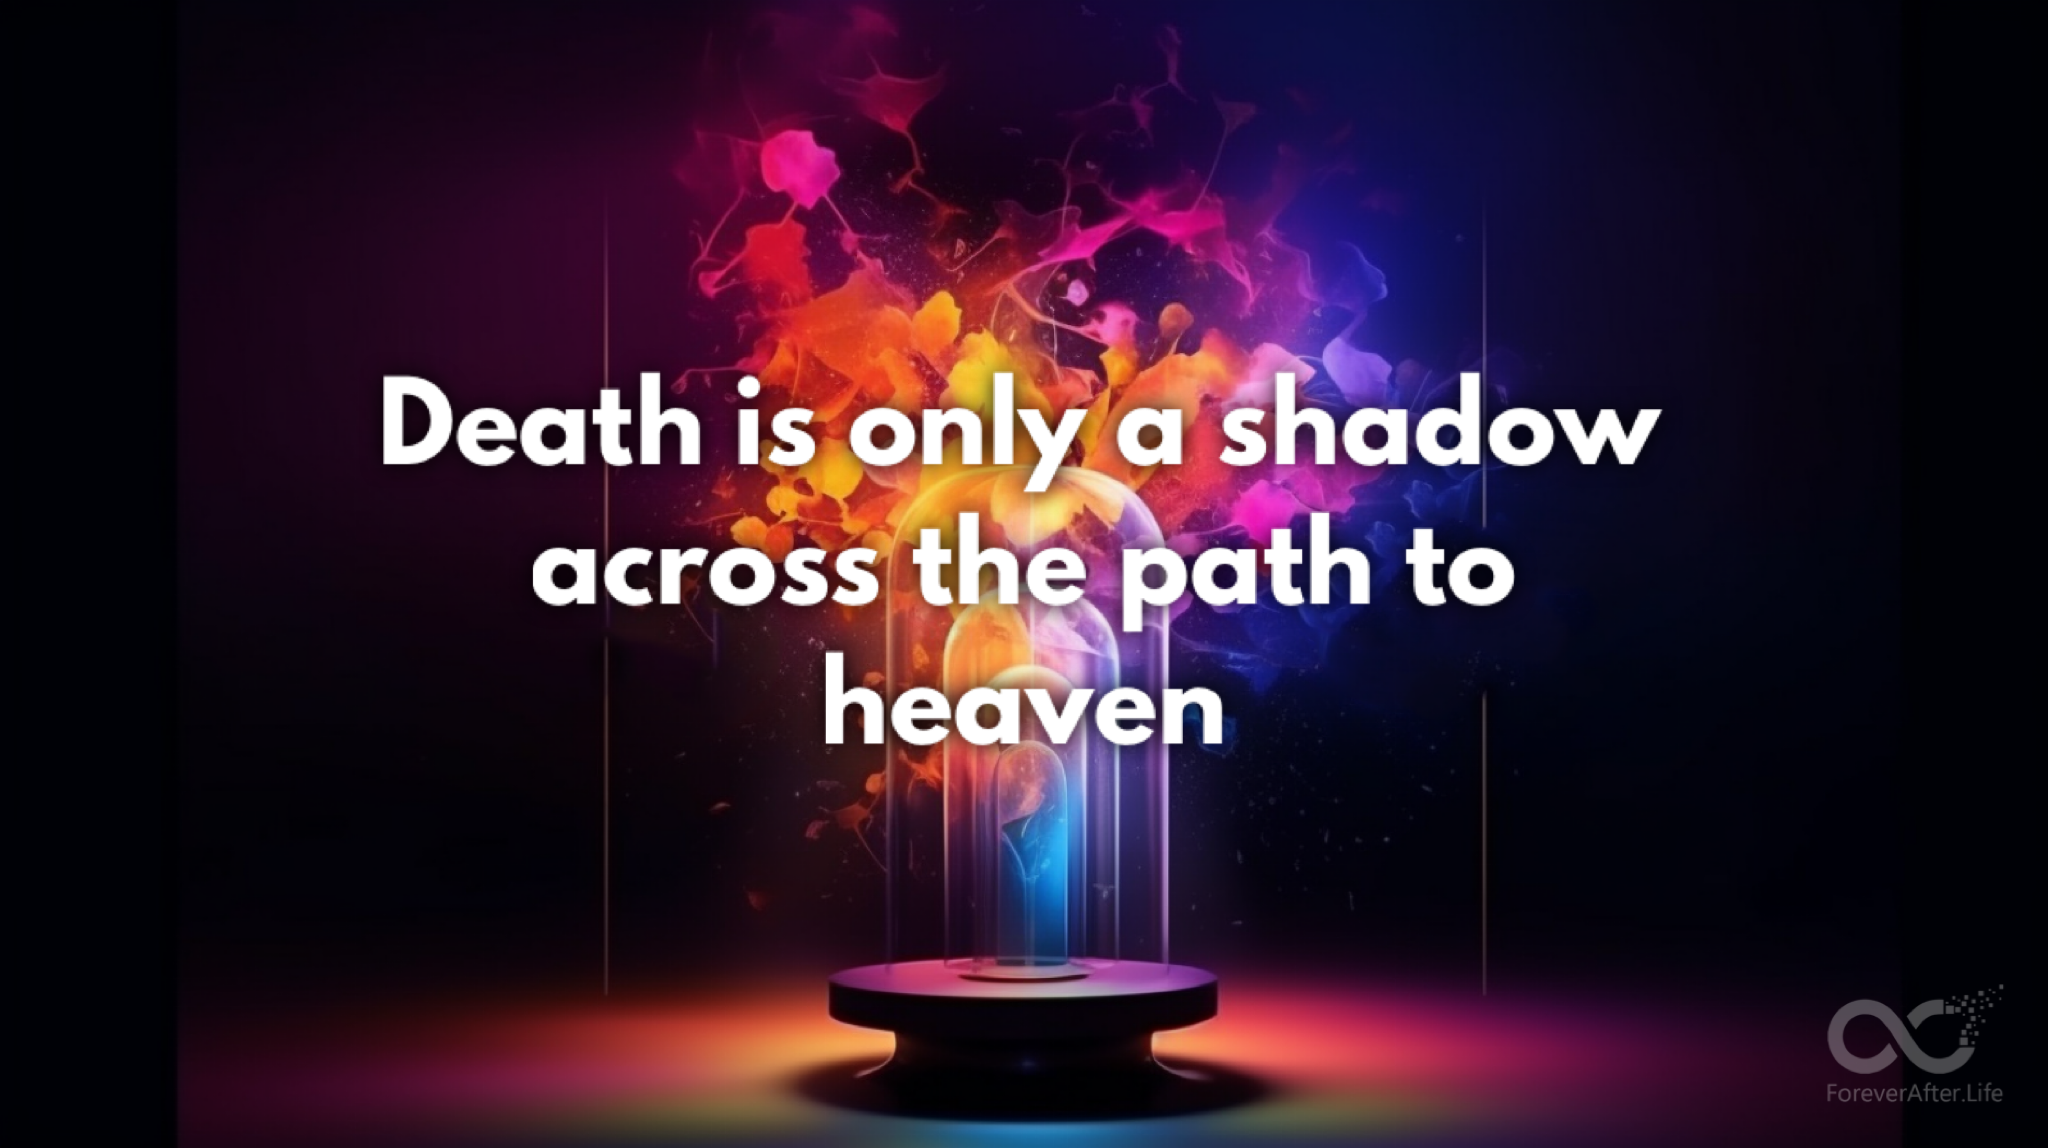 Death is only a shadow across the path to heaven